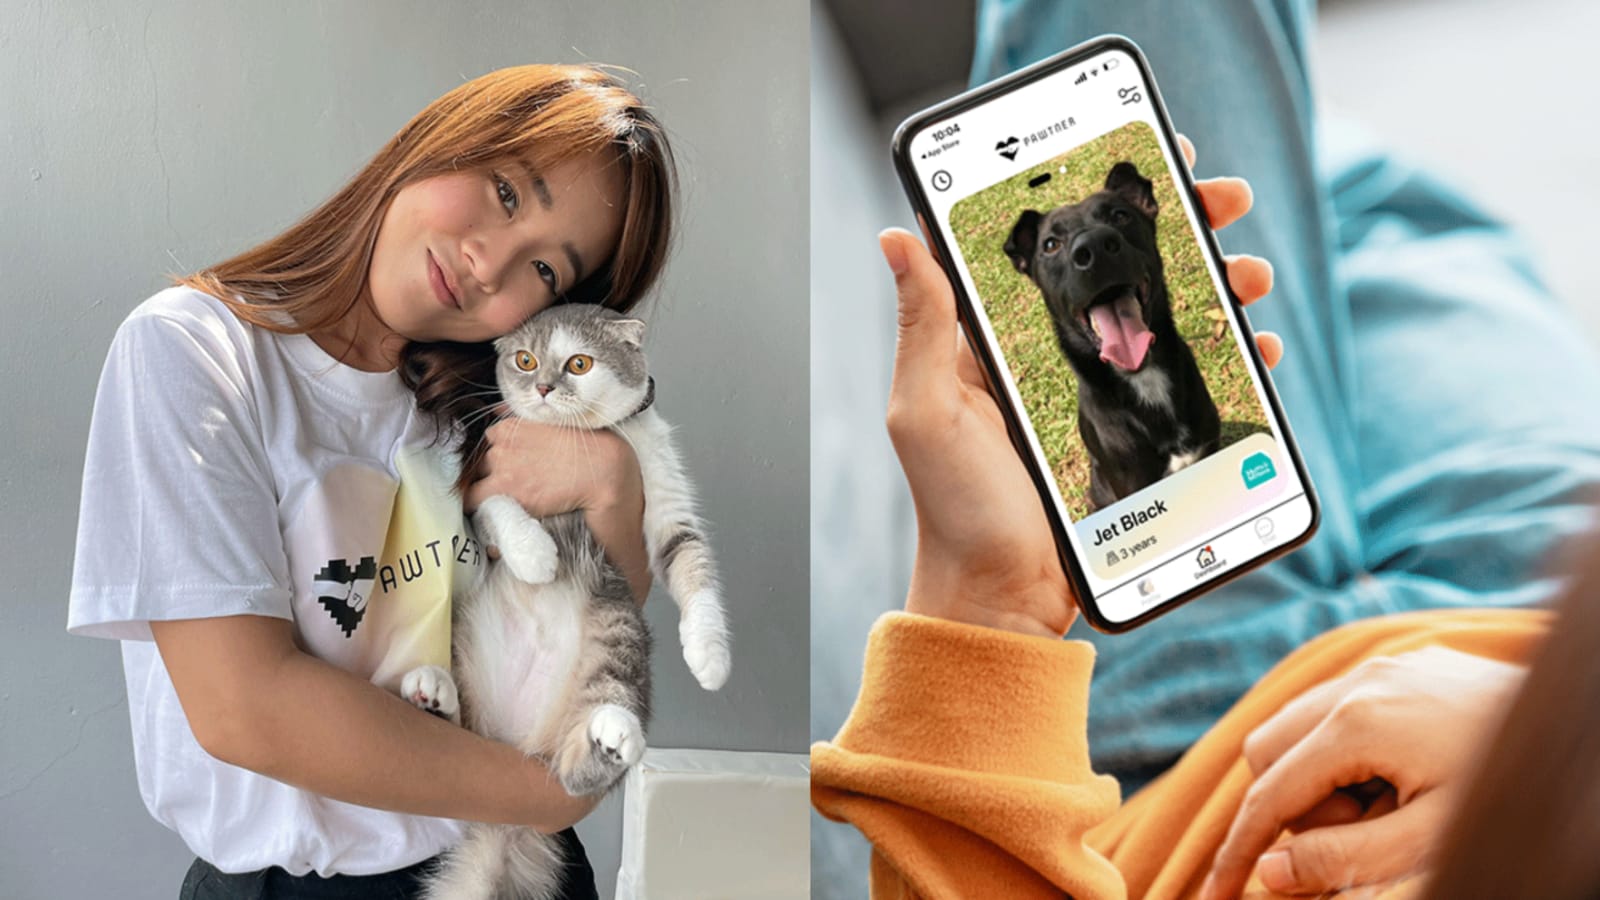 looking-to-adopt-a-dog-or-cat?-this-millennial-wants-to-simplify-the-process-with-a-matchmaking-app